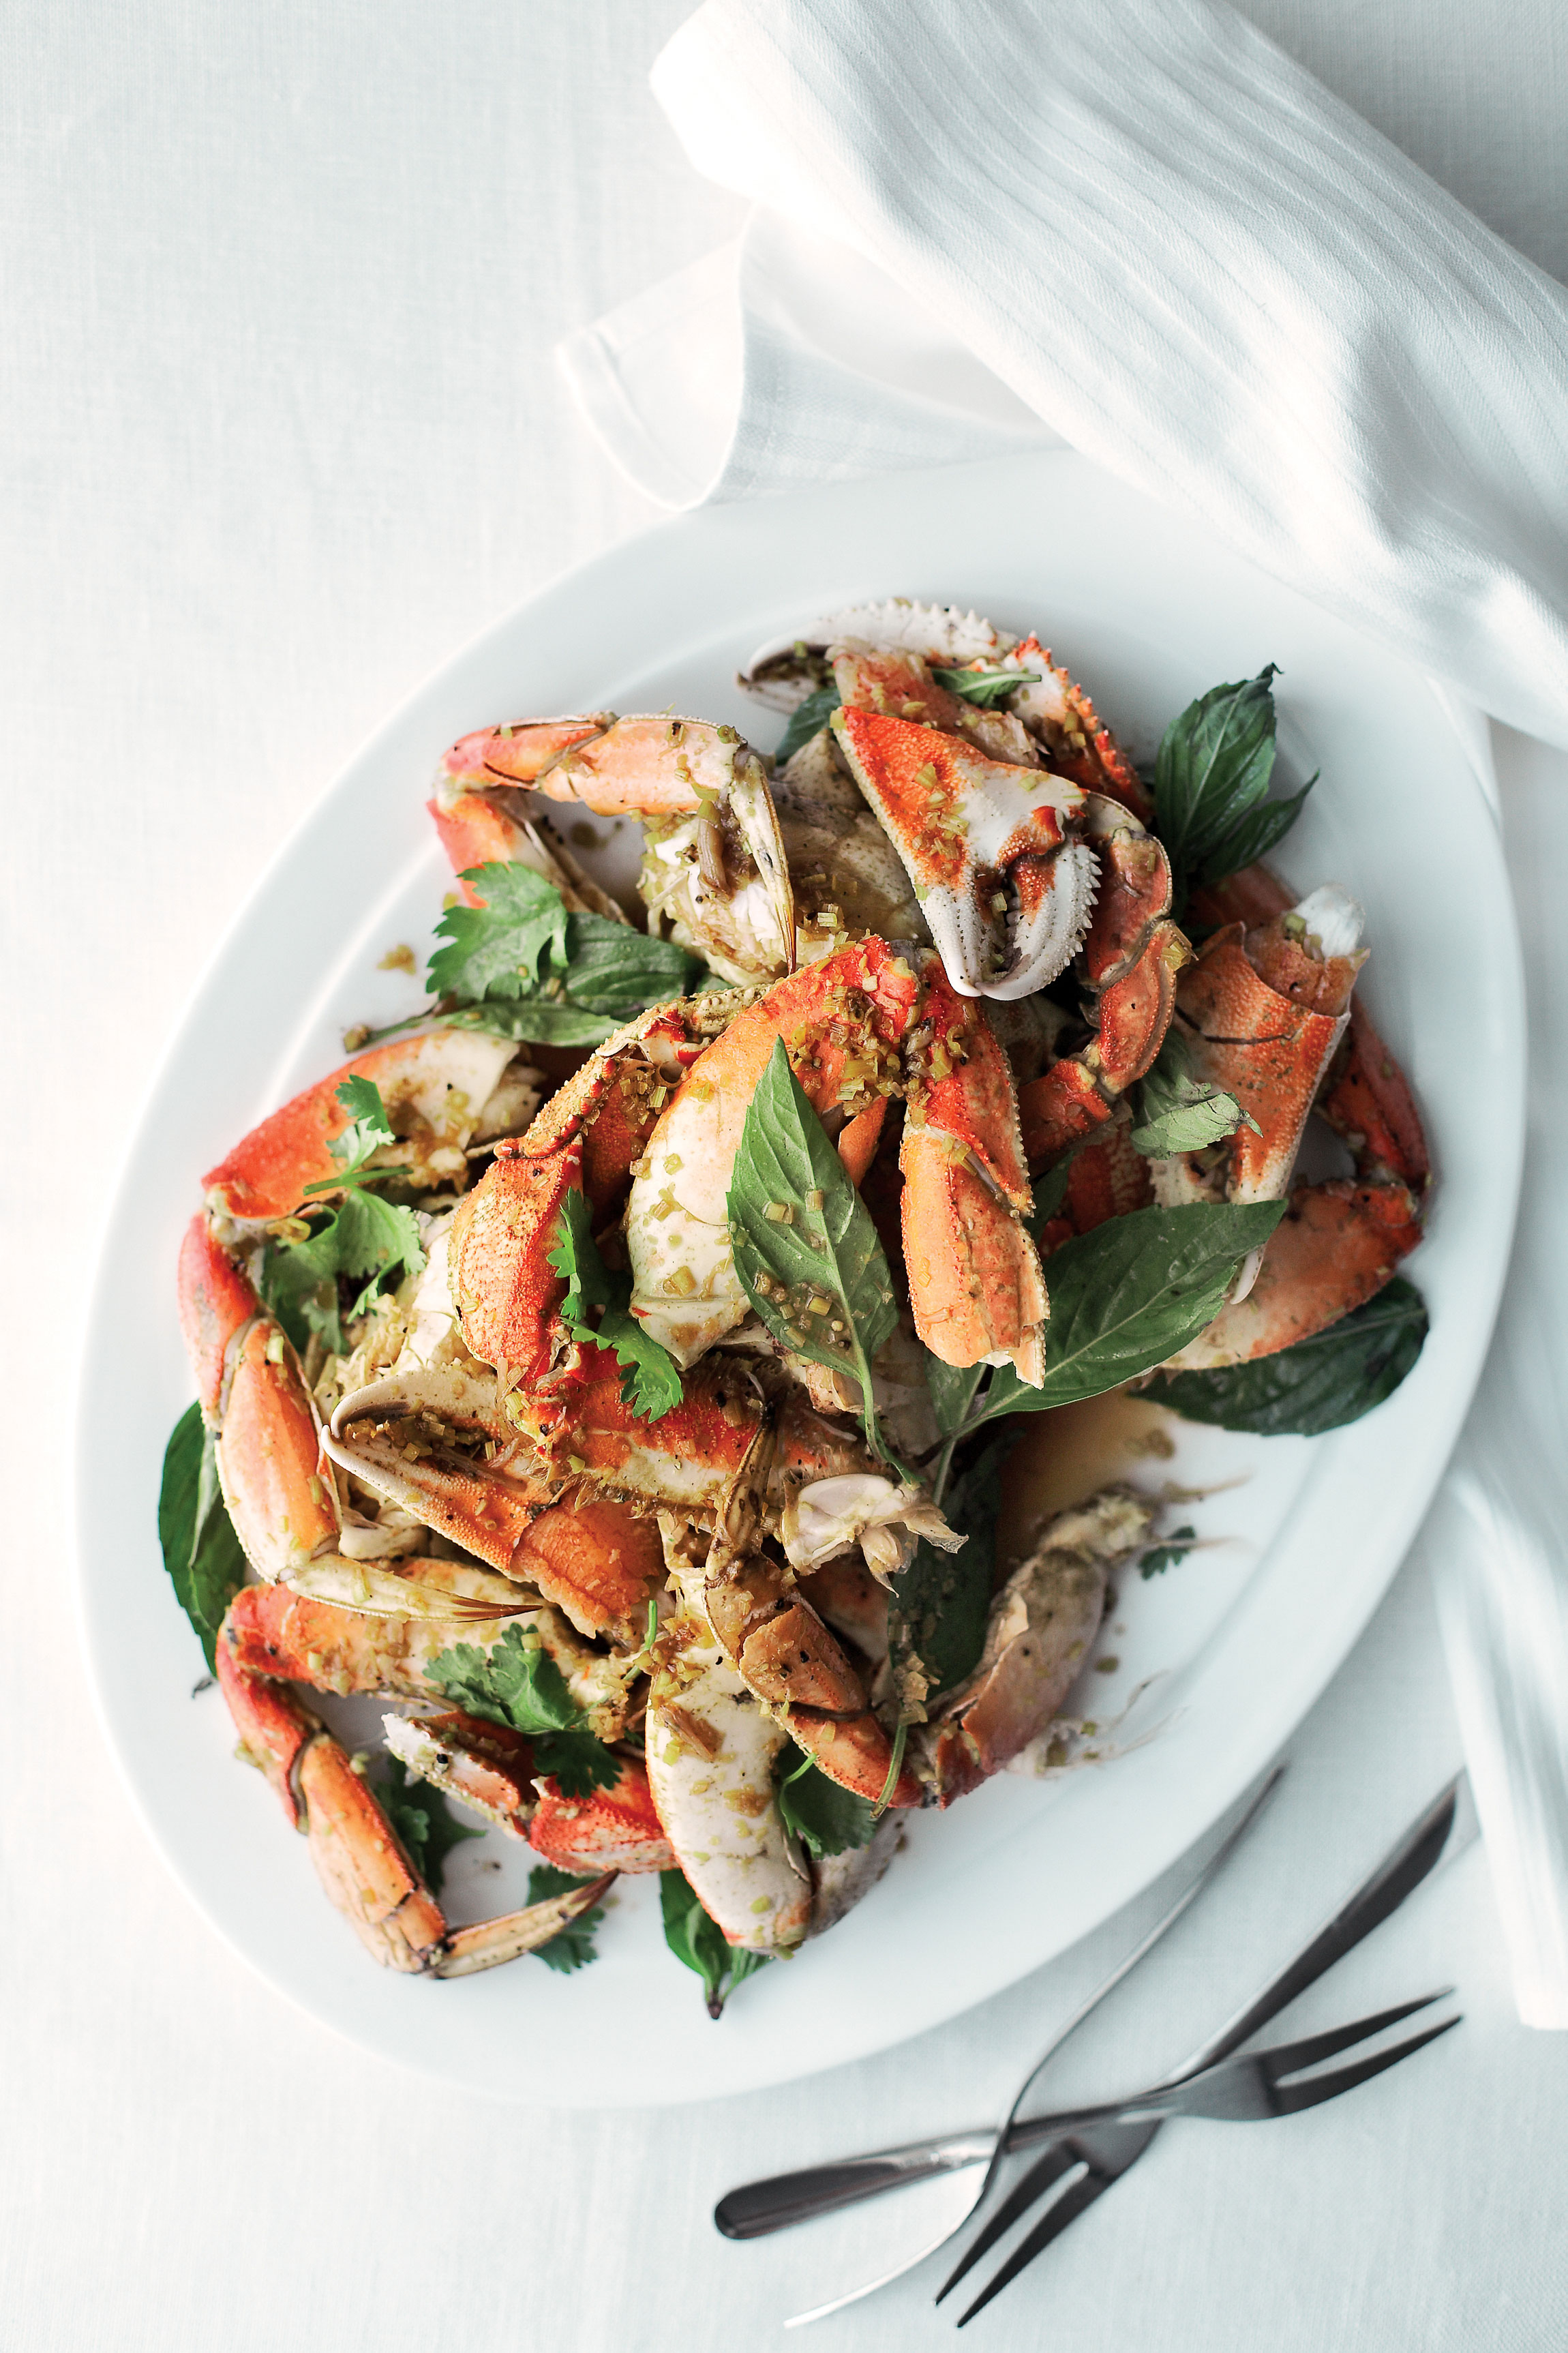 Your seafood cookbook